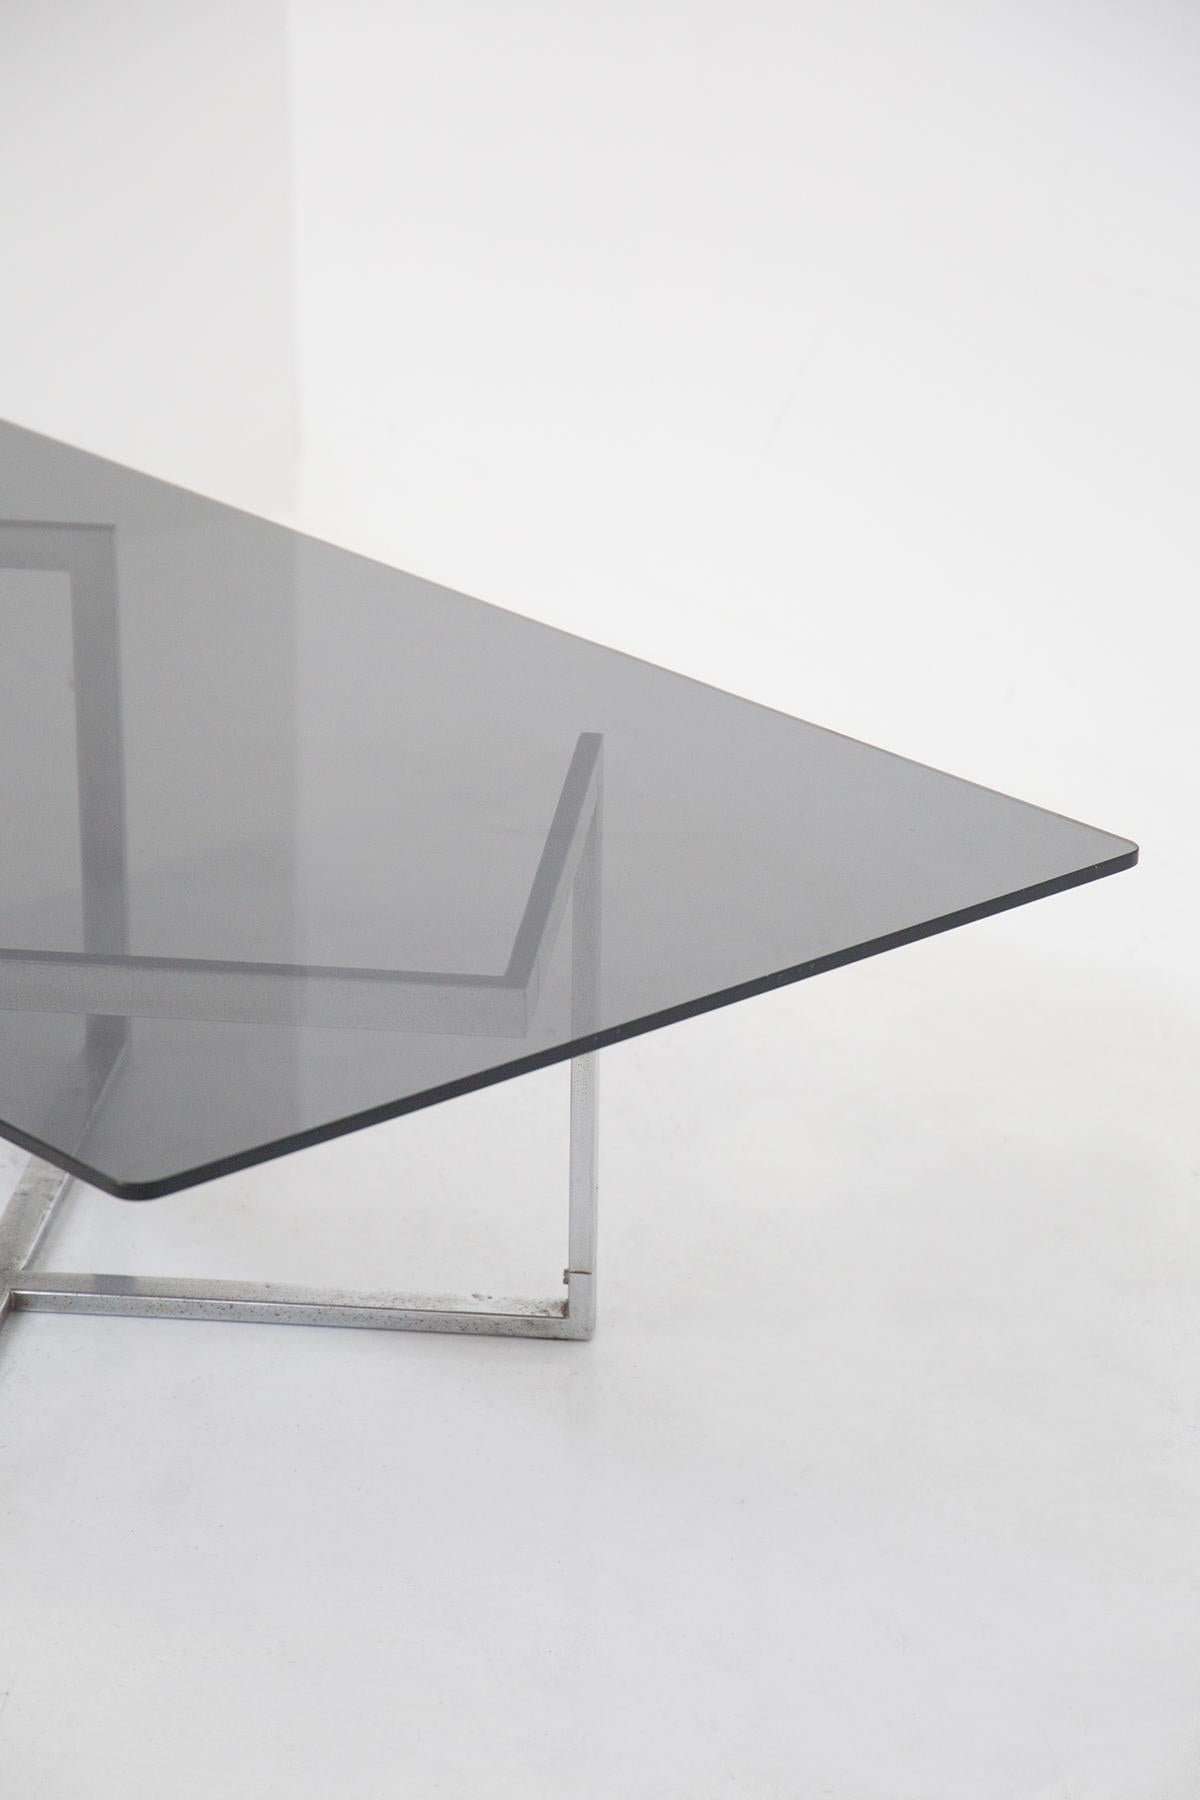 Wonderful glass and steel smoking table designed by Vittorio Introini in the 70's, from Vip's Residence.
The table has a rectangular shape with hard, classic lines.
The top is made of smoked glass very elegant on the tone of gray, while the